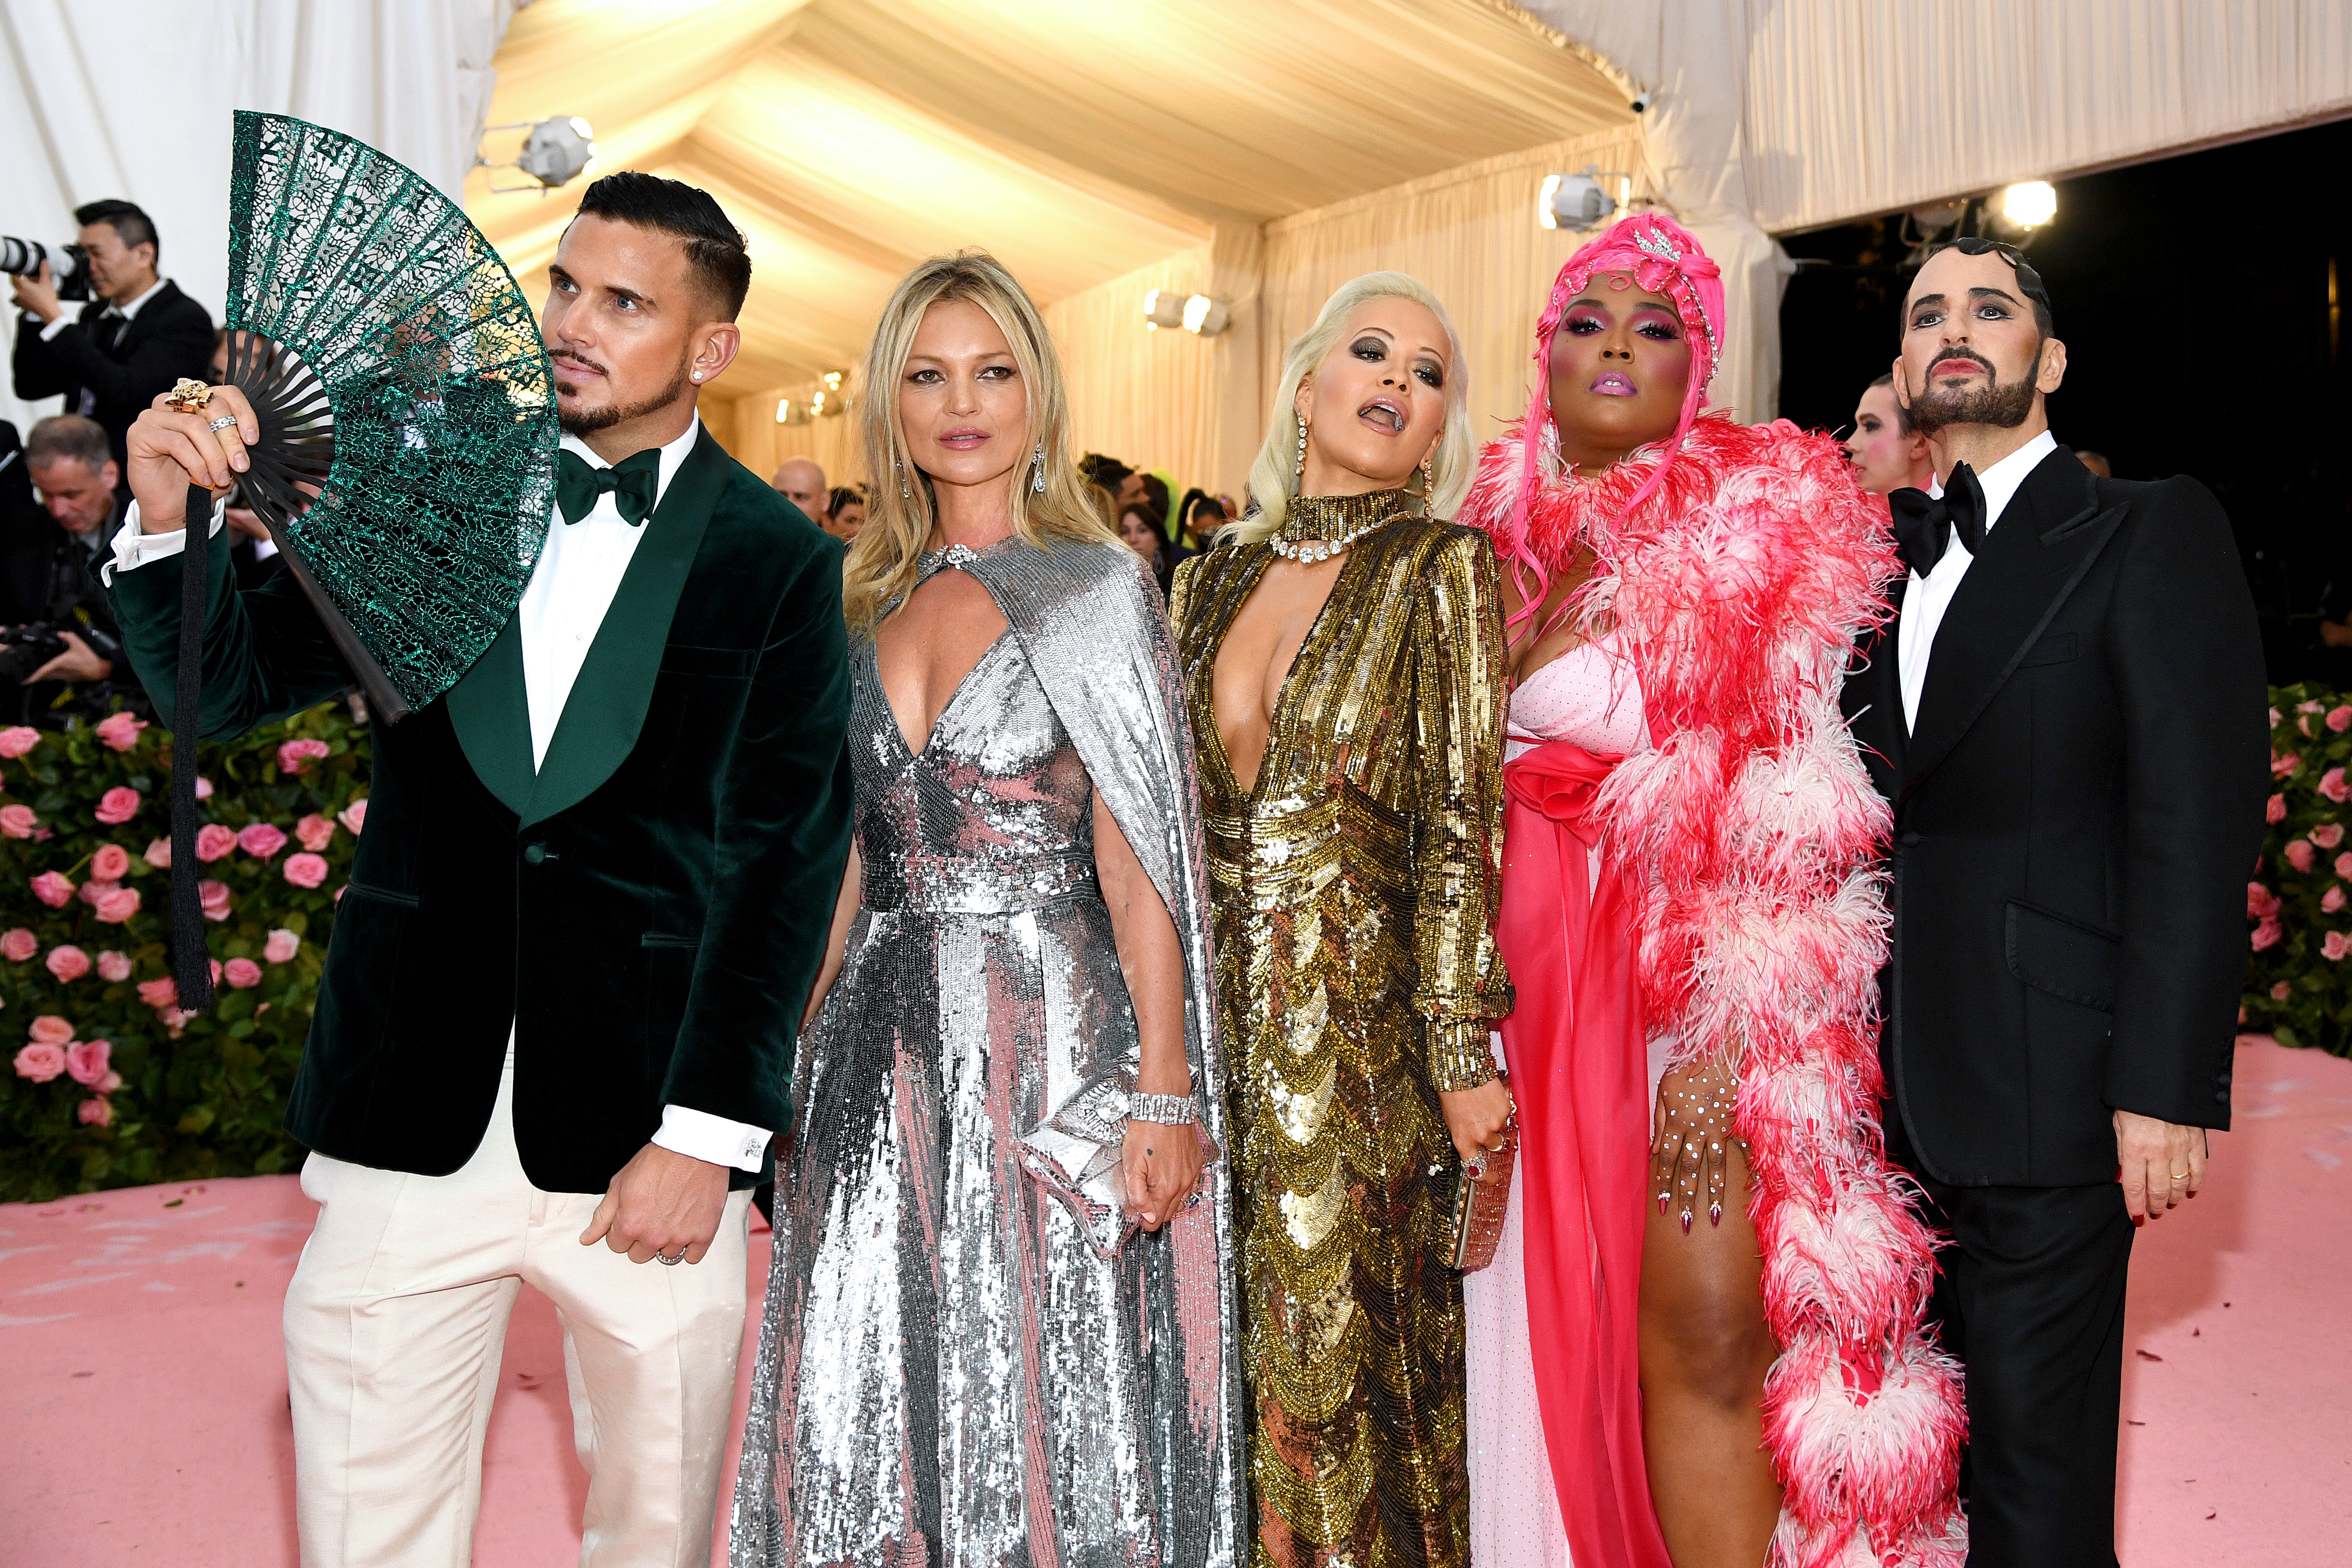 Char Defrancesco, Kate Moss, Rita Ora, Lizzo, and Marc Jacobs attend The Met Gala Celebrating Camp: Notes on Fashion at Metropolitan Museum of Art in New York City, on May 6, 2019. | Source: Getty Images